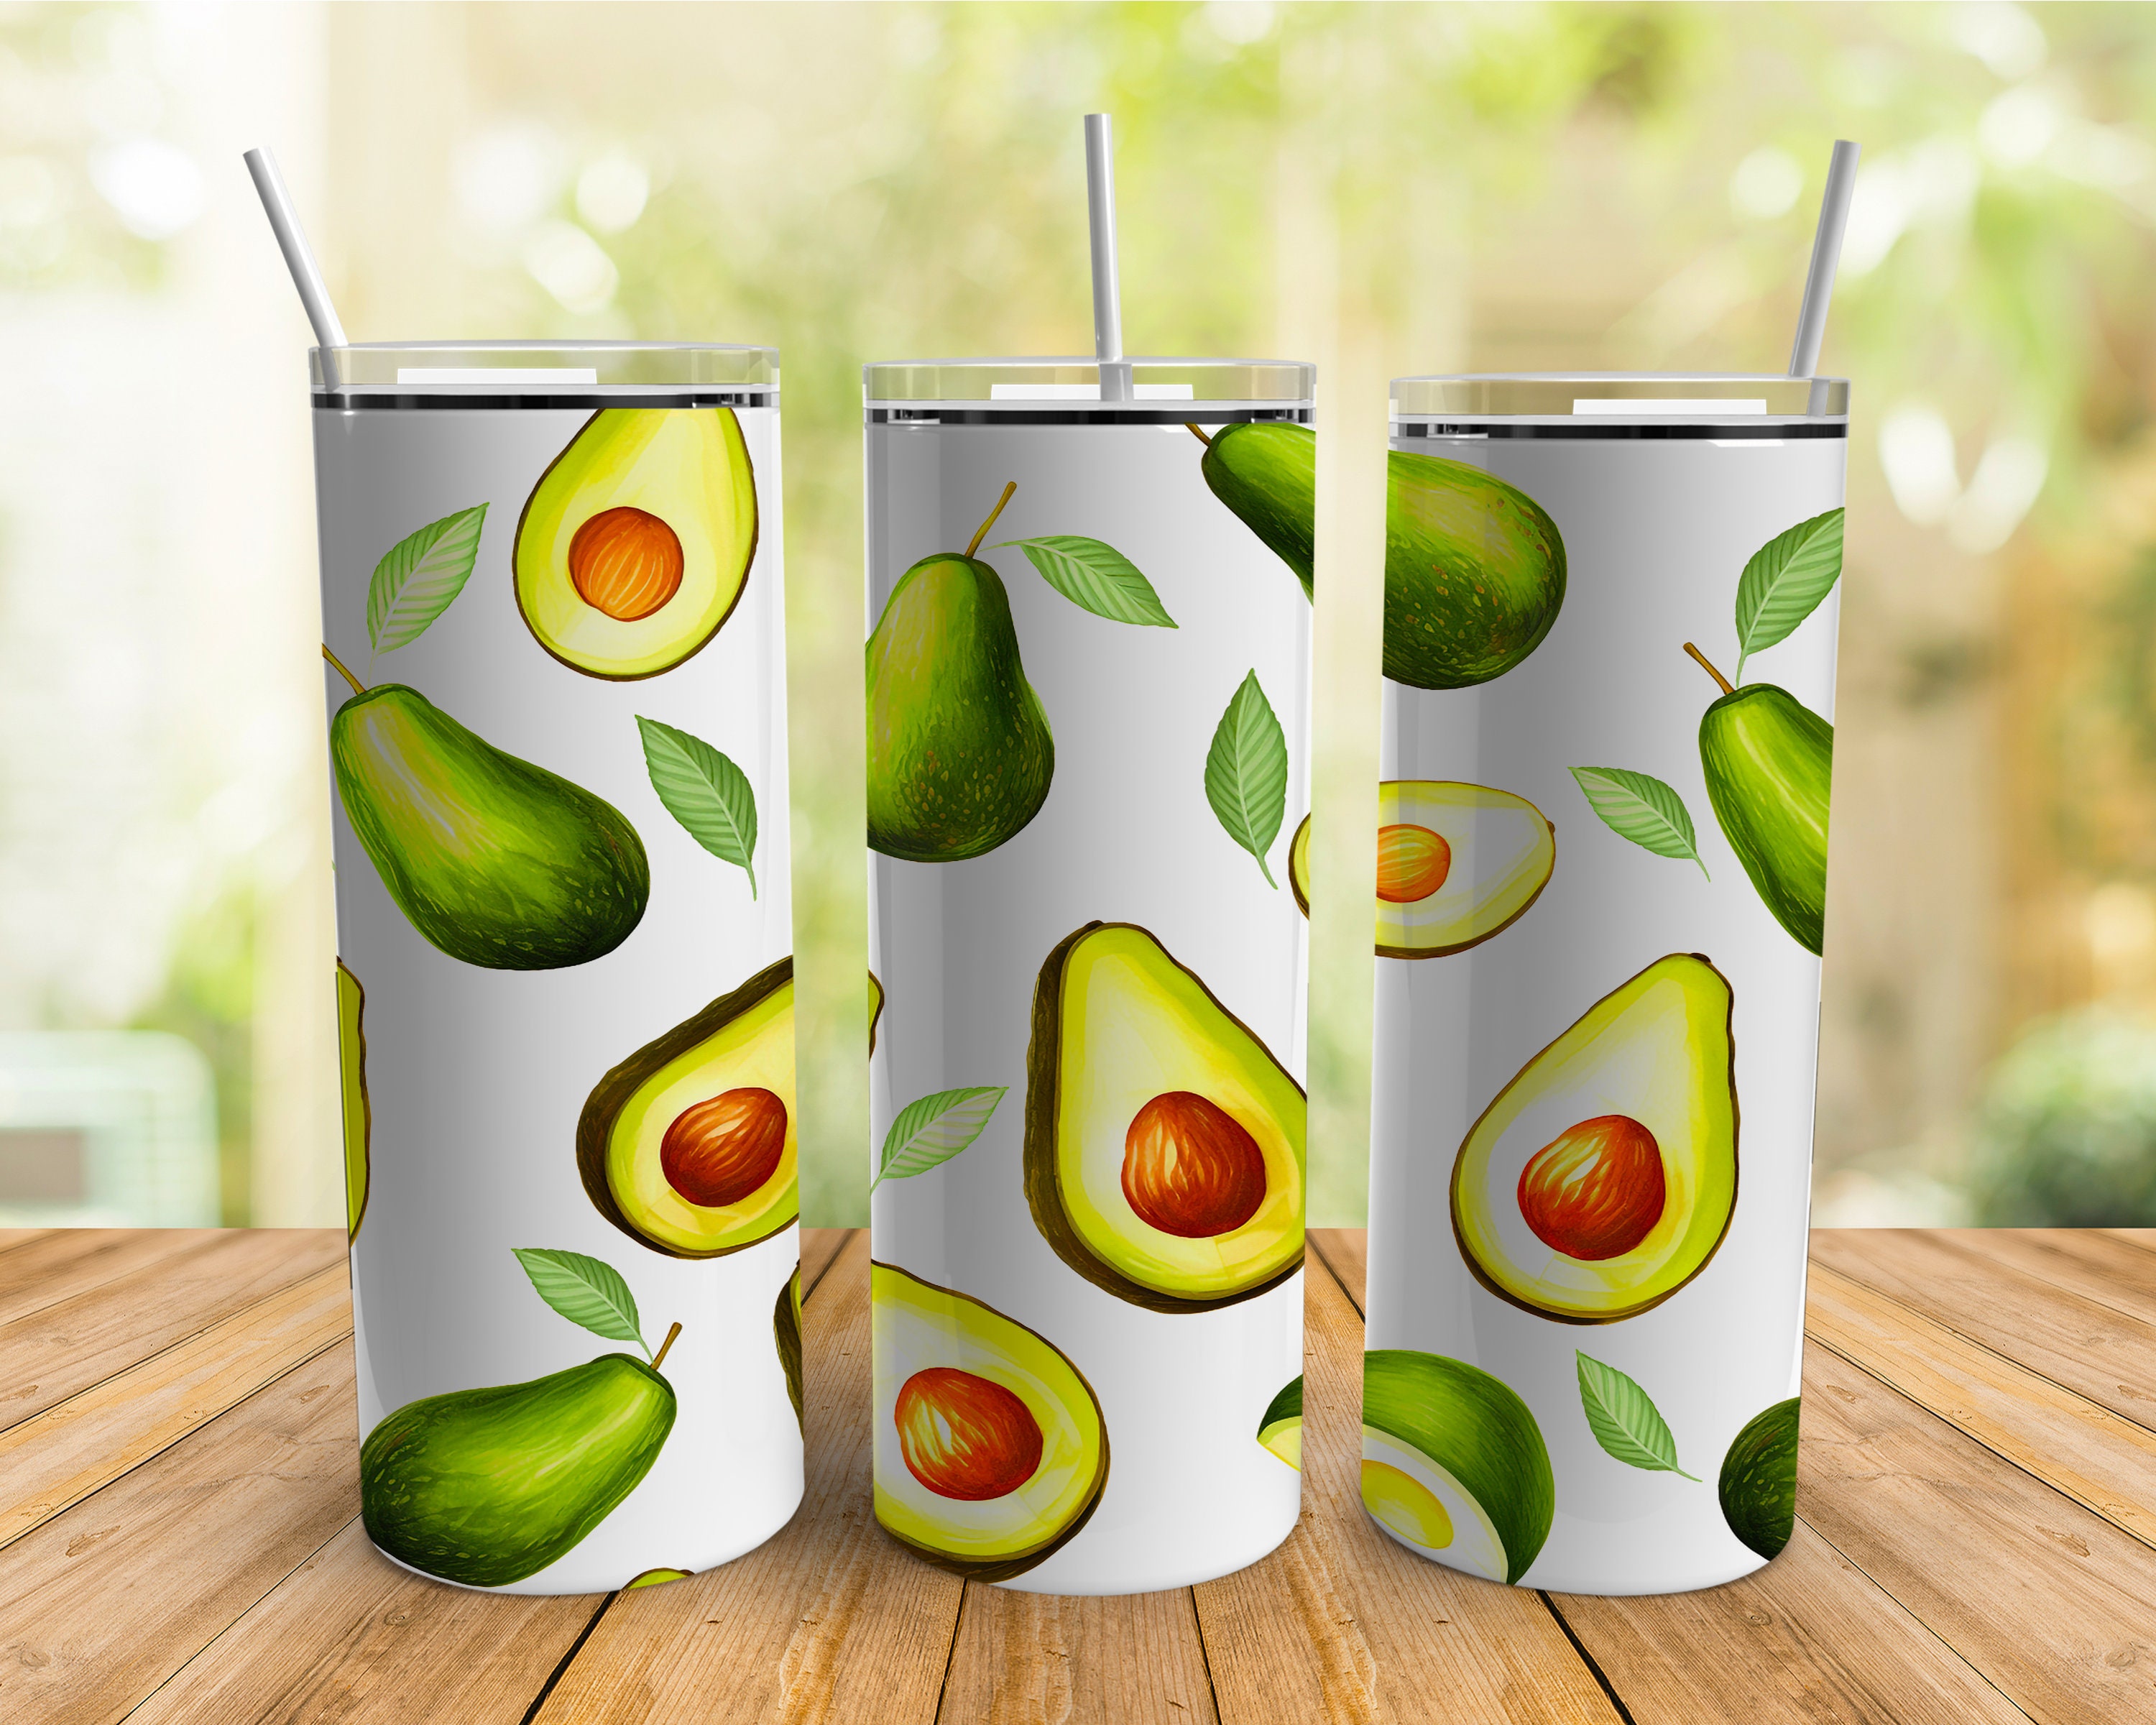  xigua Avocado Tumbler Car Travel Cup with Straw Lid